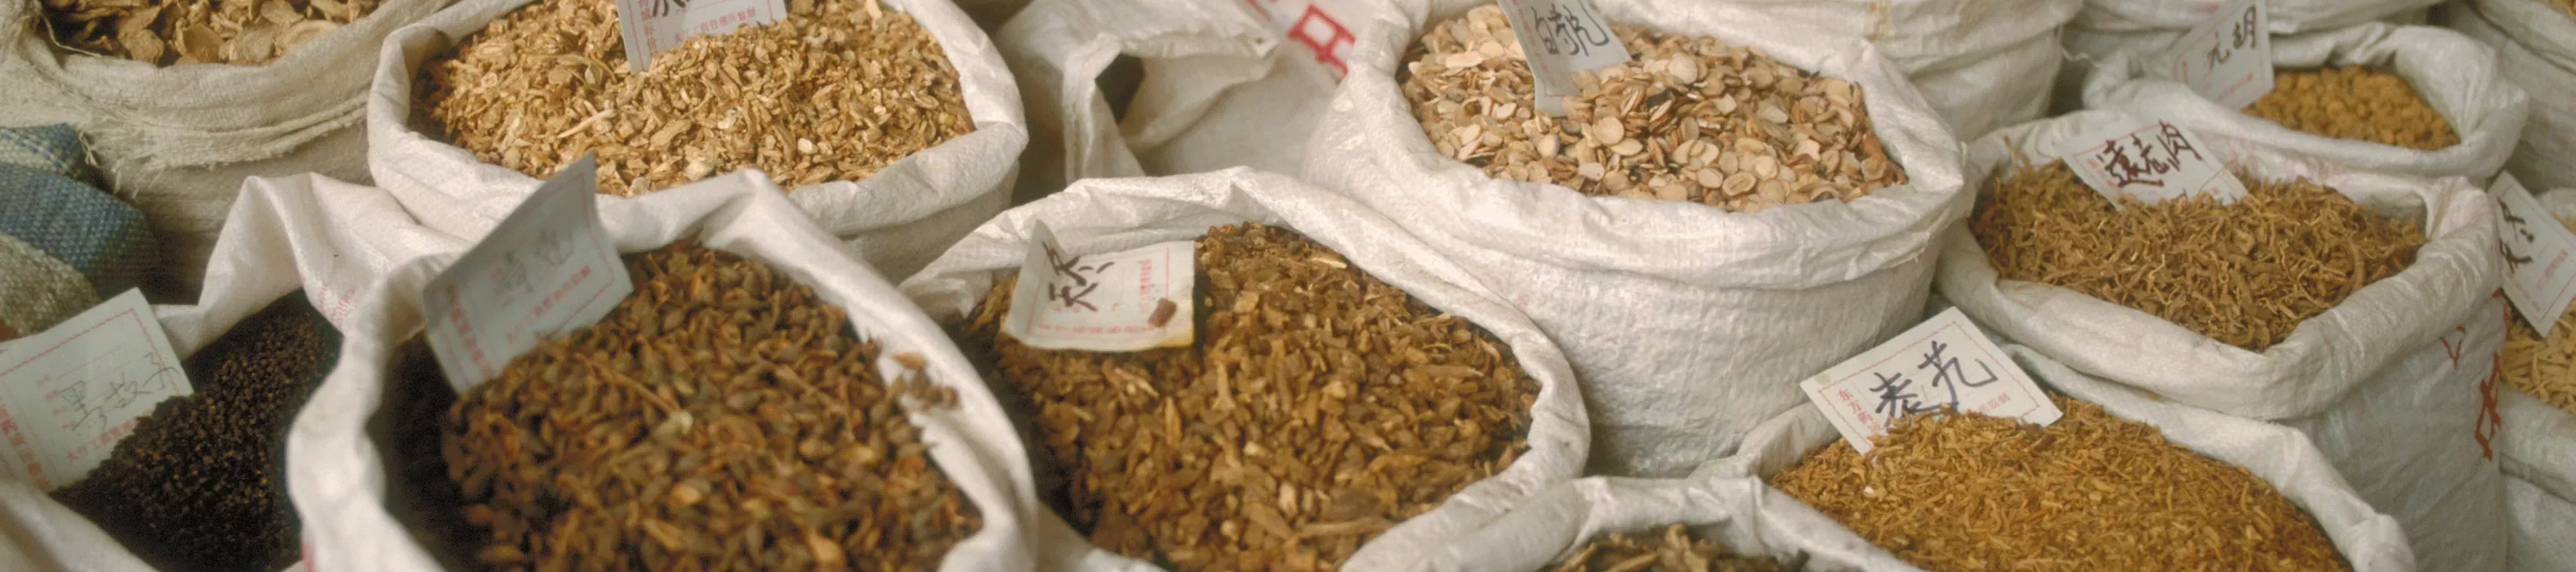 Bags of Chinese herbs